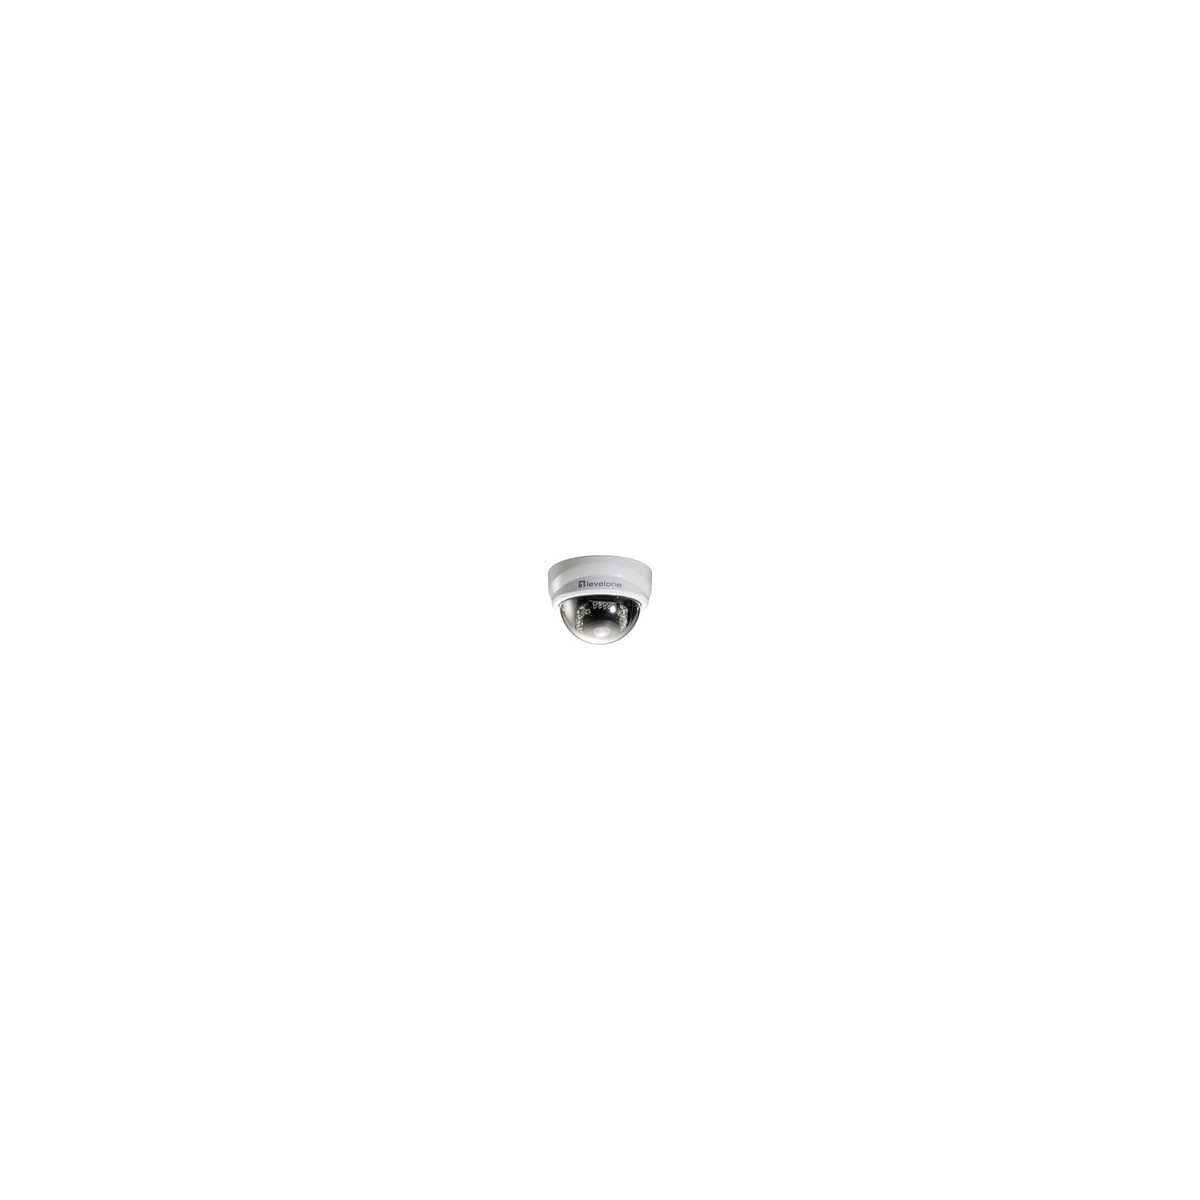 LevelOne Fixed Dome IP Network Camera - 2-Megapixel - 802.3af PoE - IR LEDs - IP security camera - Indoor  outdoor - Wired - CE 